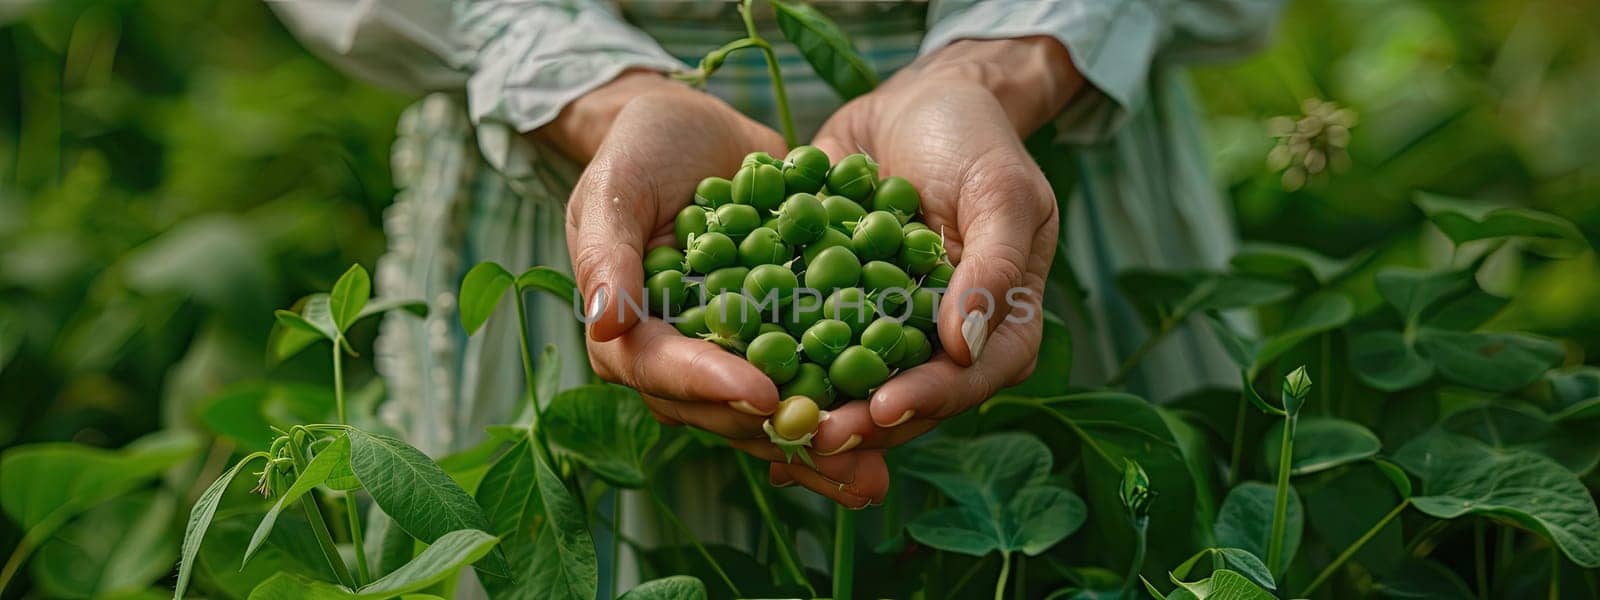 Harvest in the hands of a woman in the garden. Selective focus. nature.